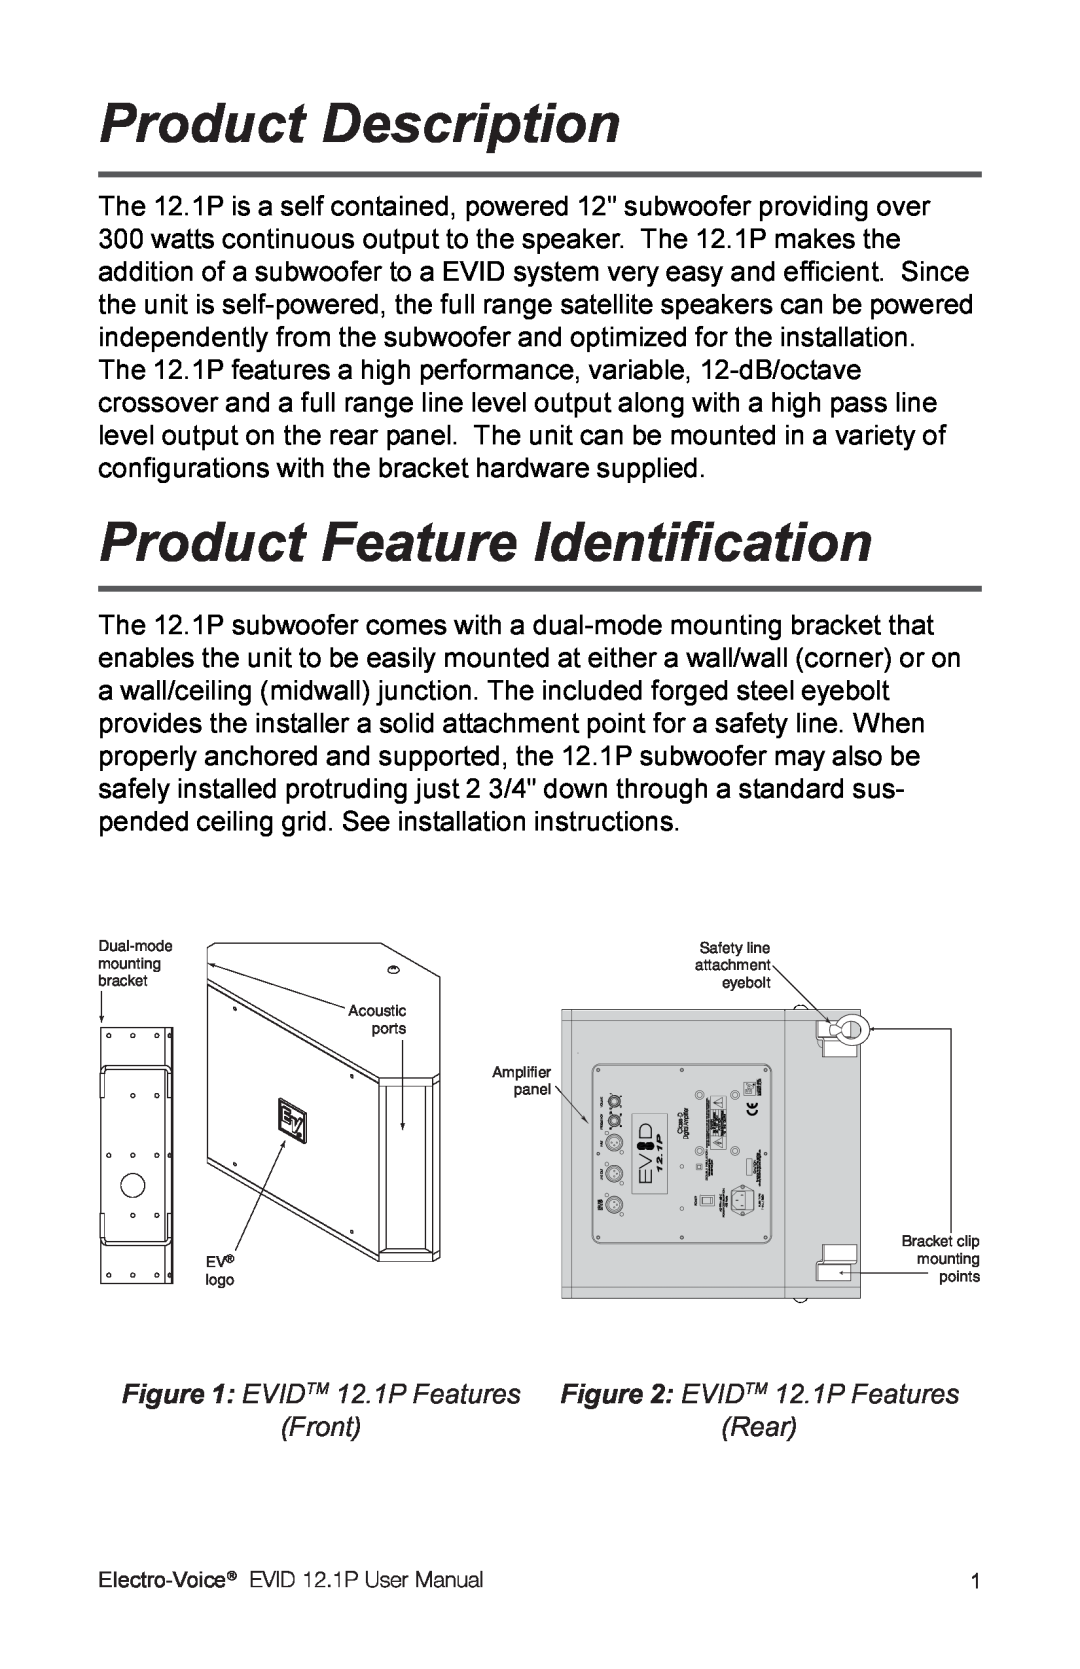 Electro-Voice 2.1P user manual Product Description, Product Feature Identification, Electro-Voice 